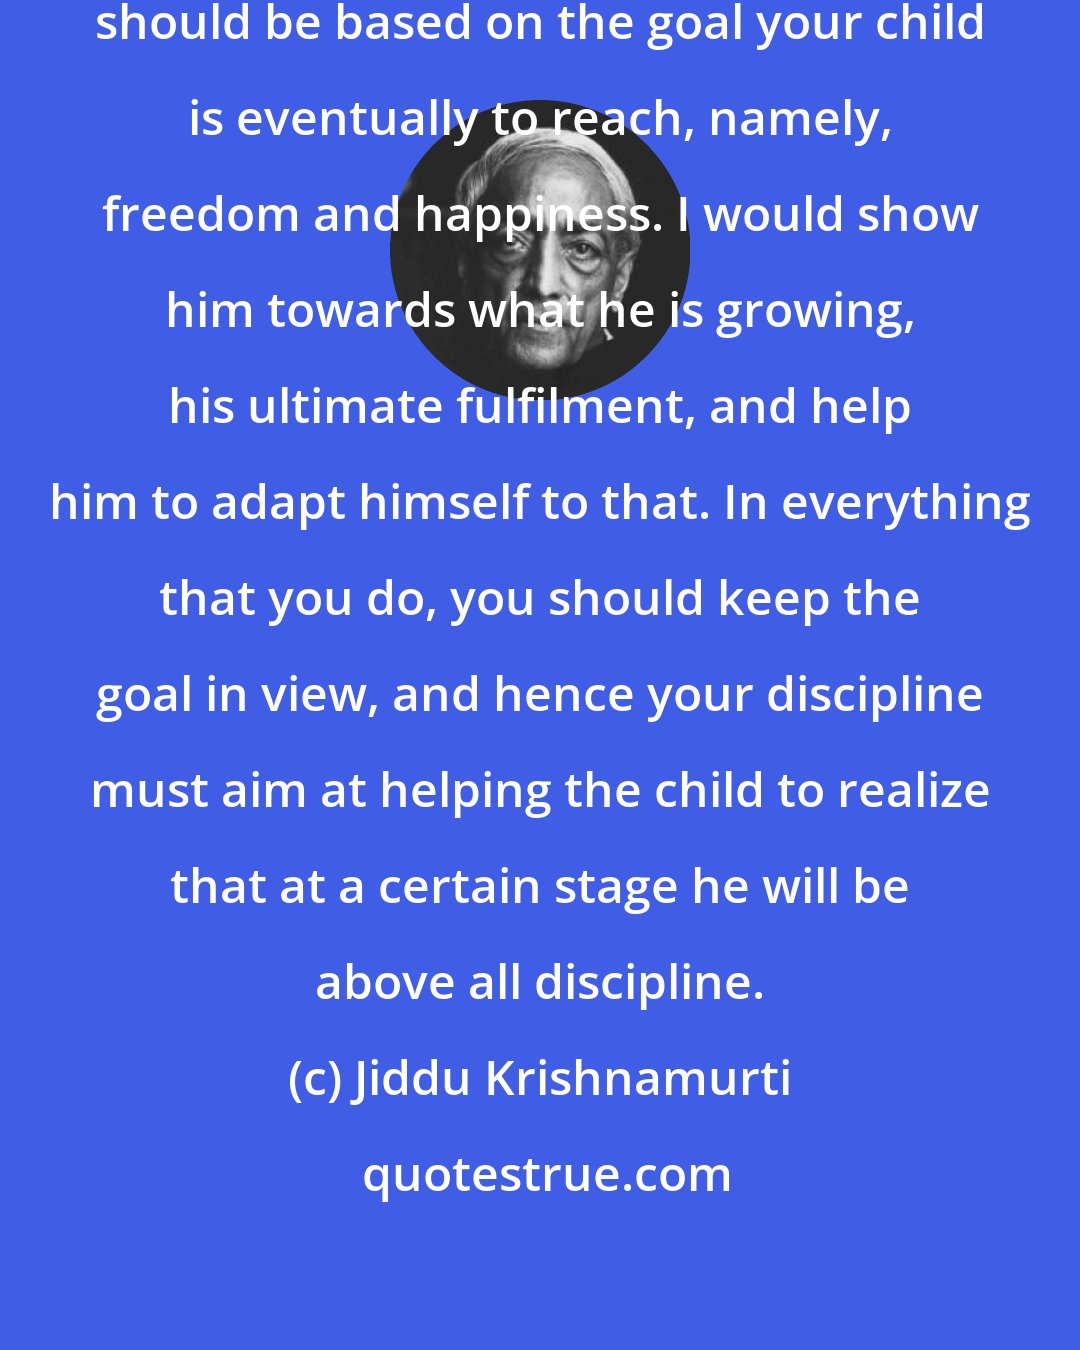 Jiddu Krishnamurti: Whatever discipline you exercise should be based on the goal your child is eventually to reach, namely, freedom and happiness. I would show him towards what he is growing, his ultimate fulfilment, and help him to adapt himself to that. In everything that you do, you should keep the goal in view, and hence your discipline must aim at helping the child to realize that at a certain stage he will be above all discipline.